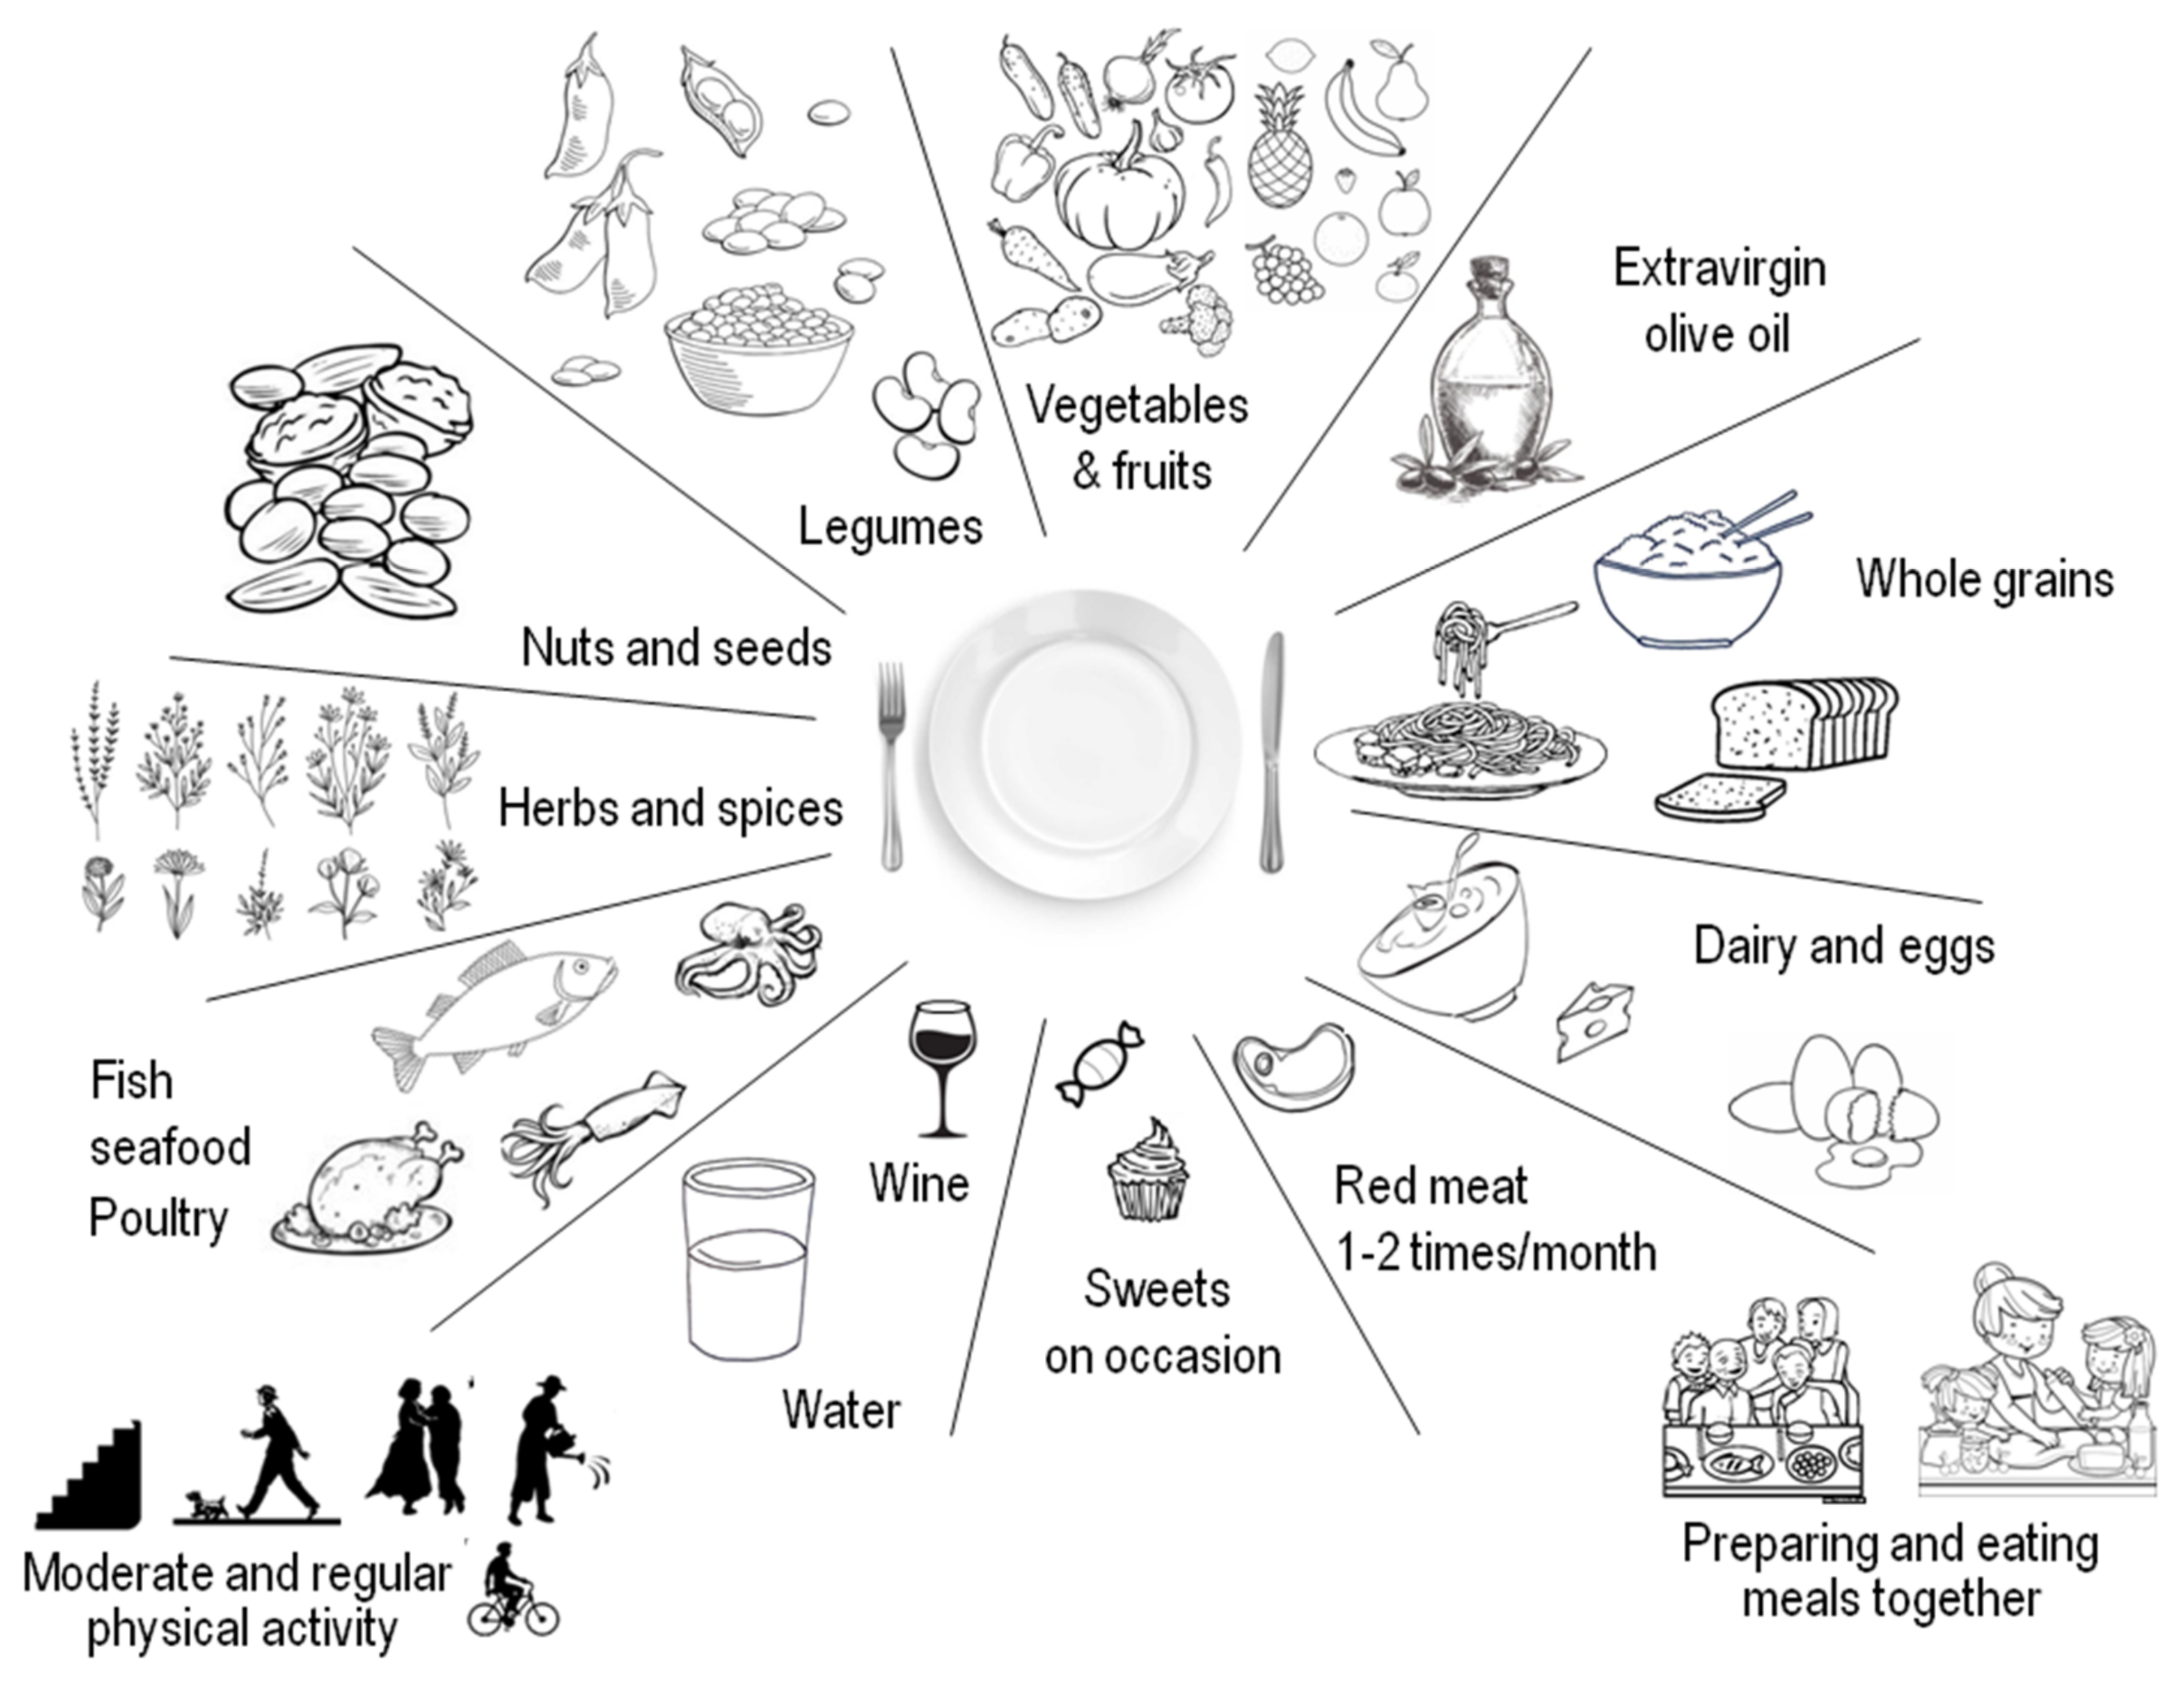 NCERT Class 6 Science Chapter 2: Components of Food YouTube Lecture  Handouts- Examrace